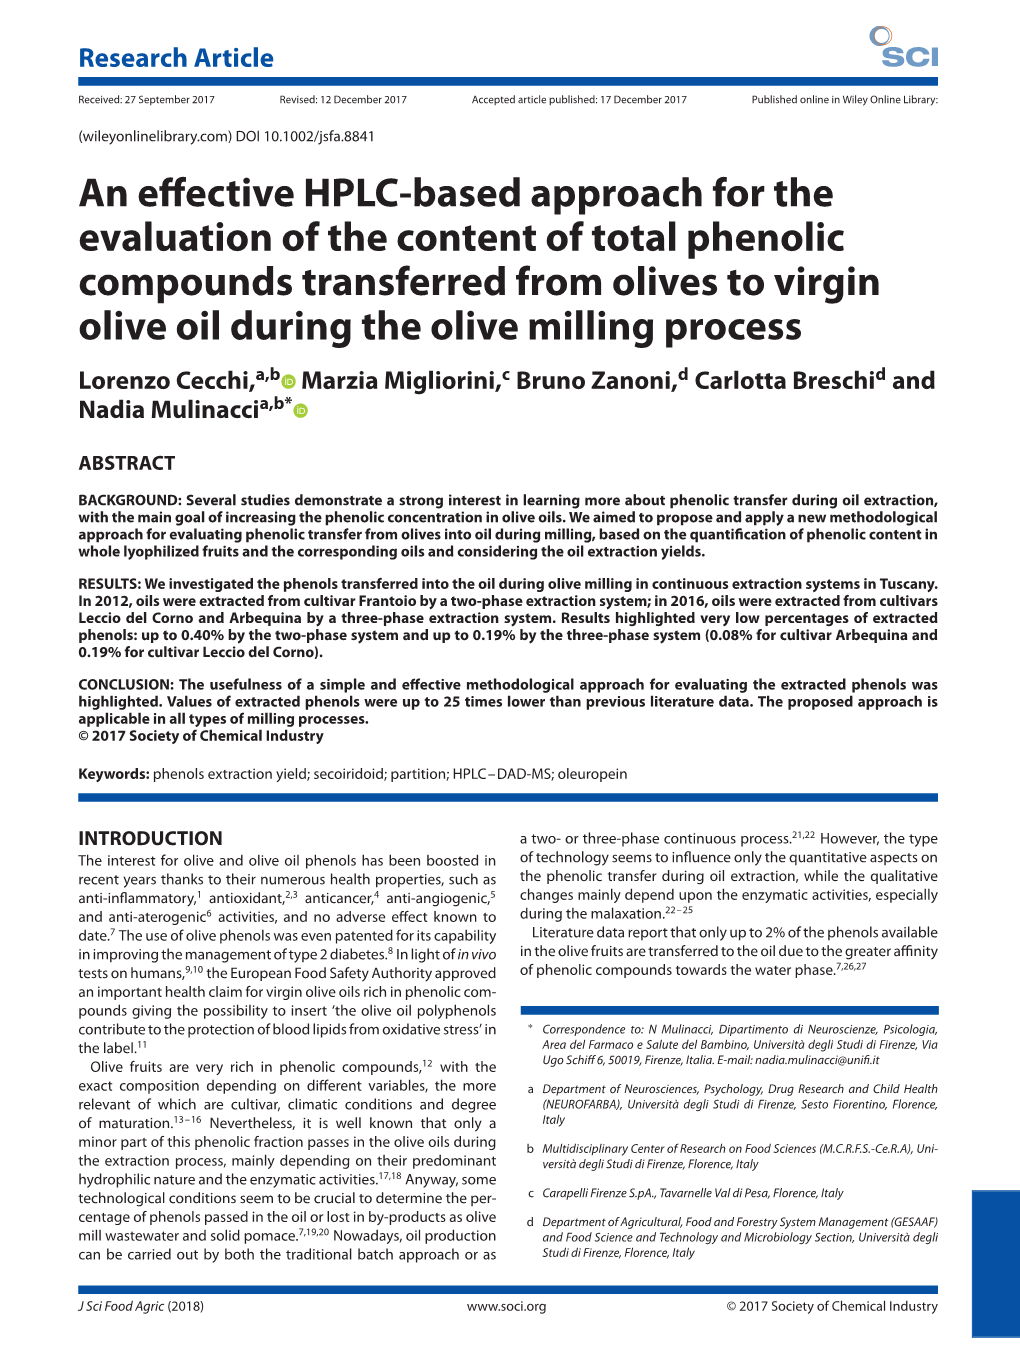 An Effective HPLC-Based Approach for the Evaluation of the Content Of